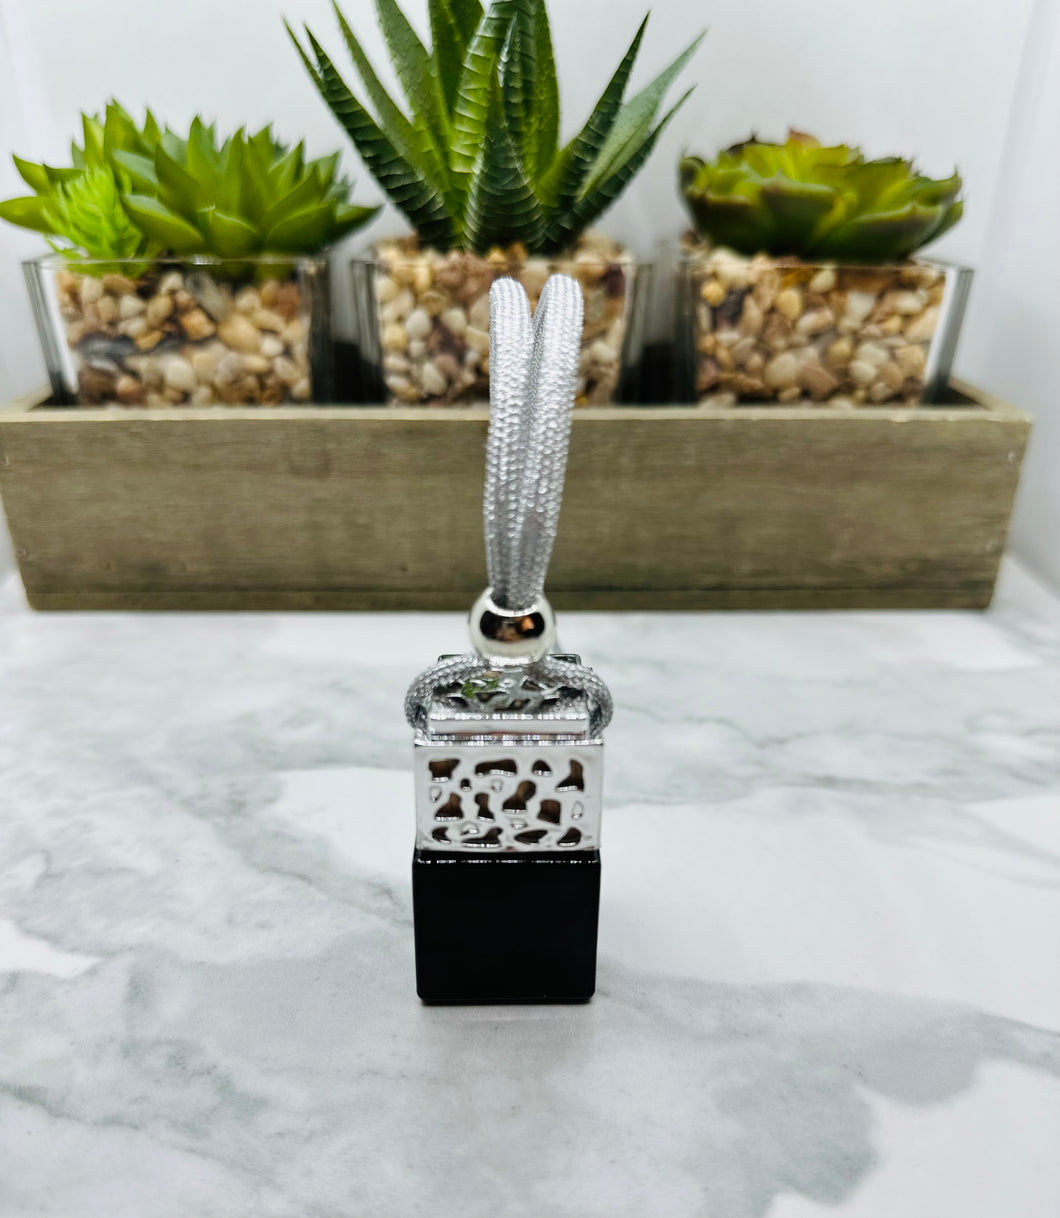 Luxury Hanging Car Diffuser - Black Glass/Silver Lid